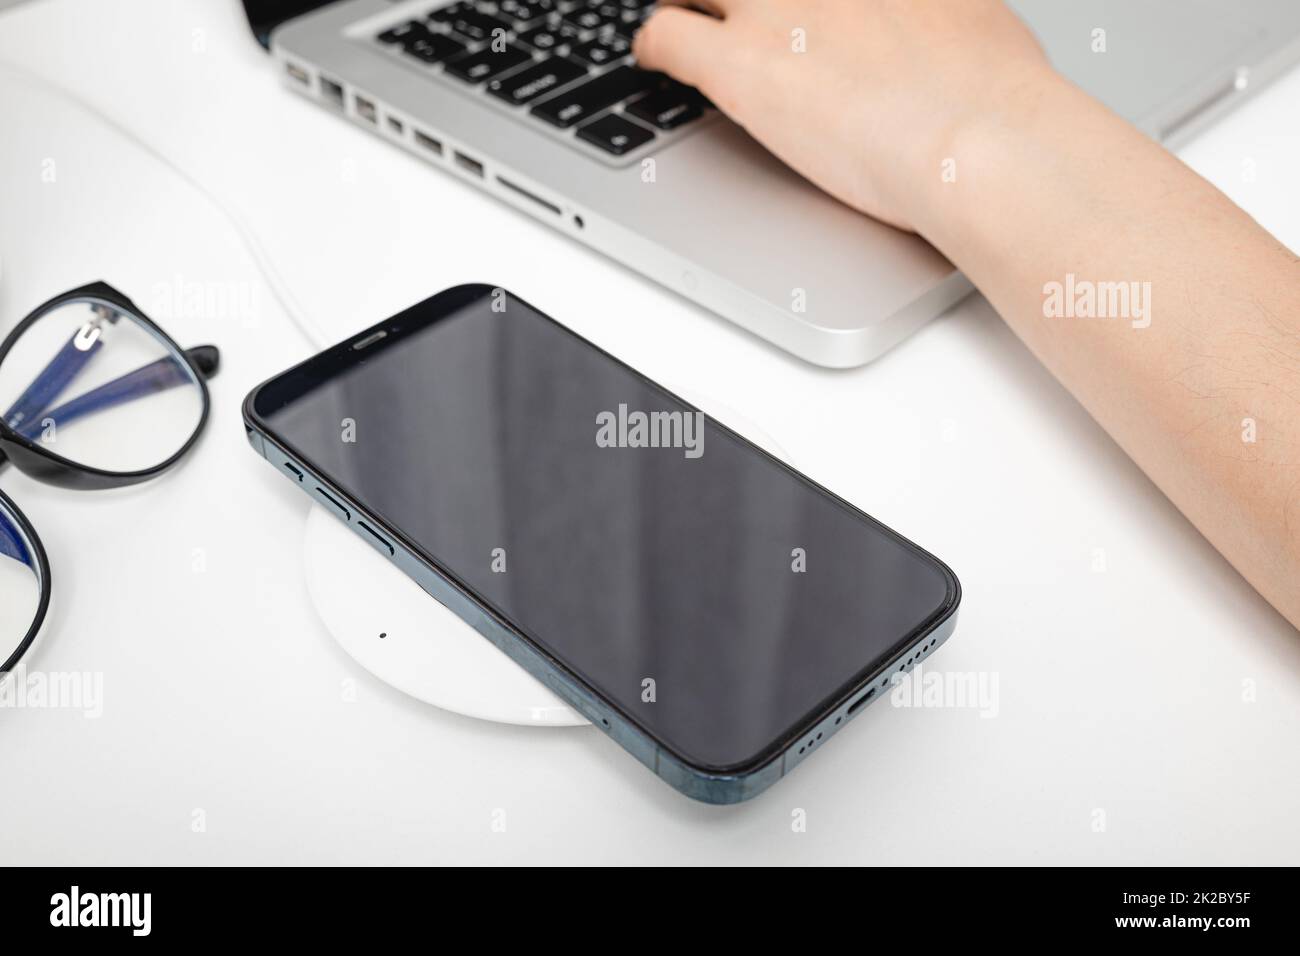 Charging smartphone battery with wireless charger device Stock Photo